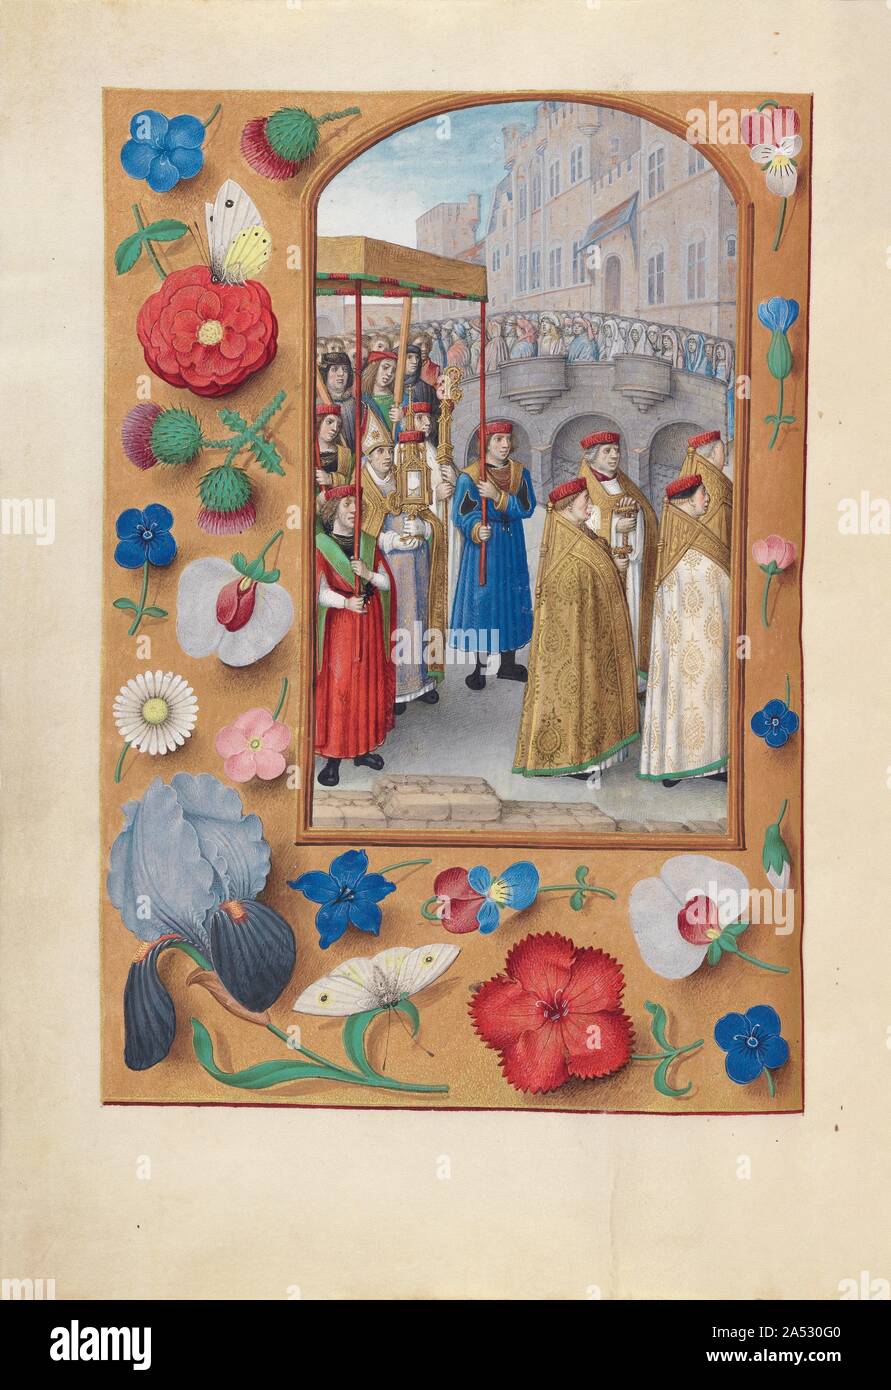 Hours of Queen Isabella the Catholic, Queen of Spain: Fol. 43v, Procession of the Sacrament, c. 1500. This manuscript was illuminated by a circle of at least five highly organized manuscript painters active in the Flemish cities of Ghent and Bruges. The principal illuminator was Alexander Bening, who painted the majority of the book's miniatures. Manuscripts produced by this circle of artists are renowned for the decoration of their borders, which typically feature a rich variety of realistically-painted flowers, birds, and butterflies. This prayer book, called a book of hours, was intended no Stock Photo